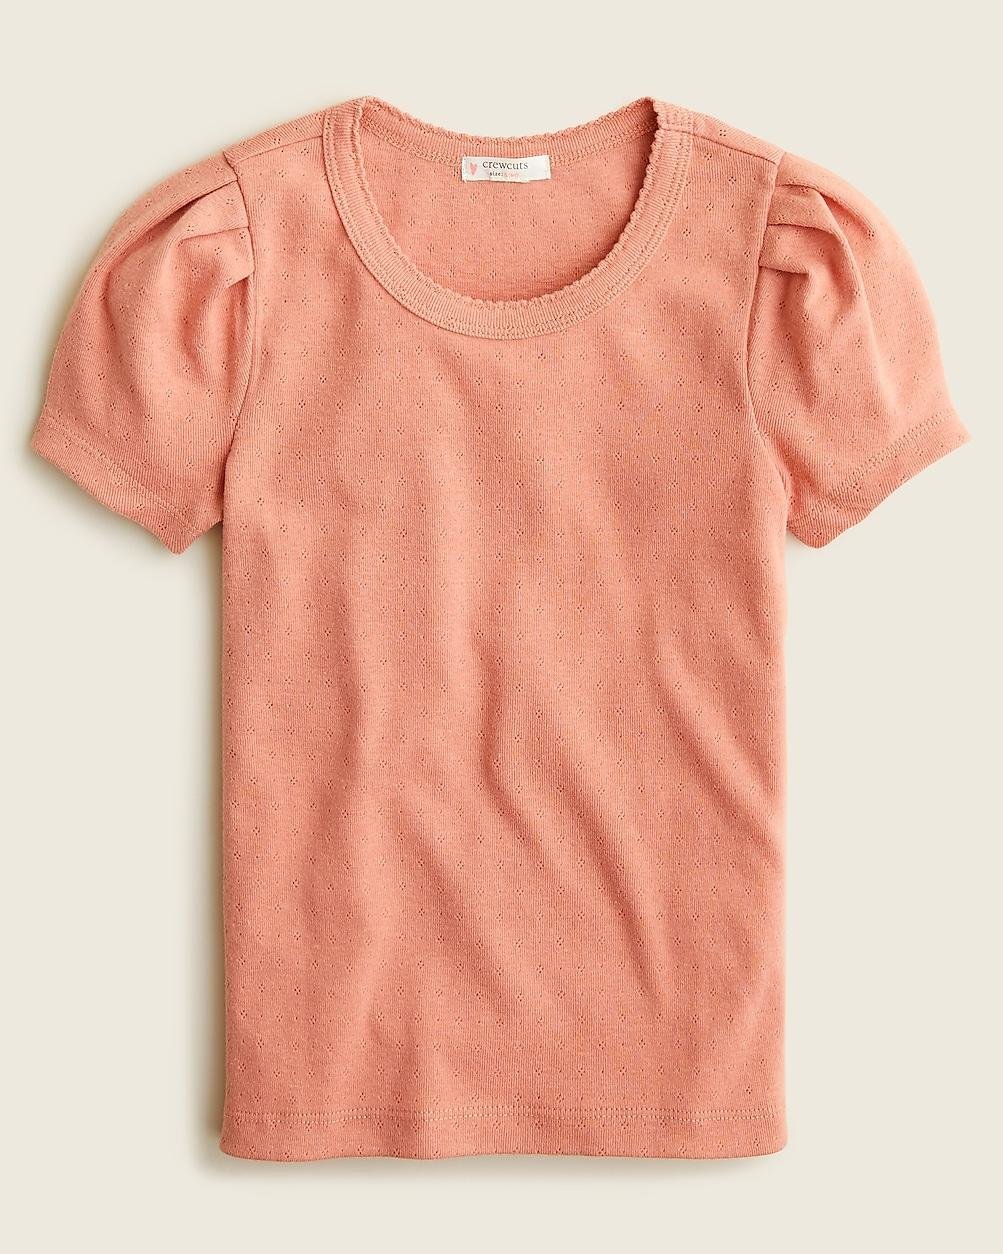 Girls' puff-sleeve pointelle T-shirt by J.CREW